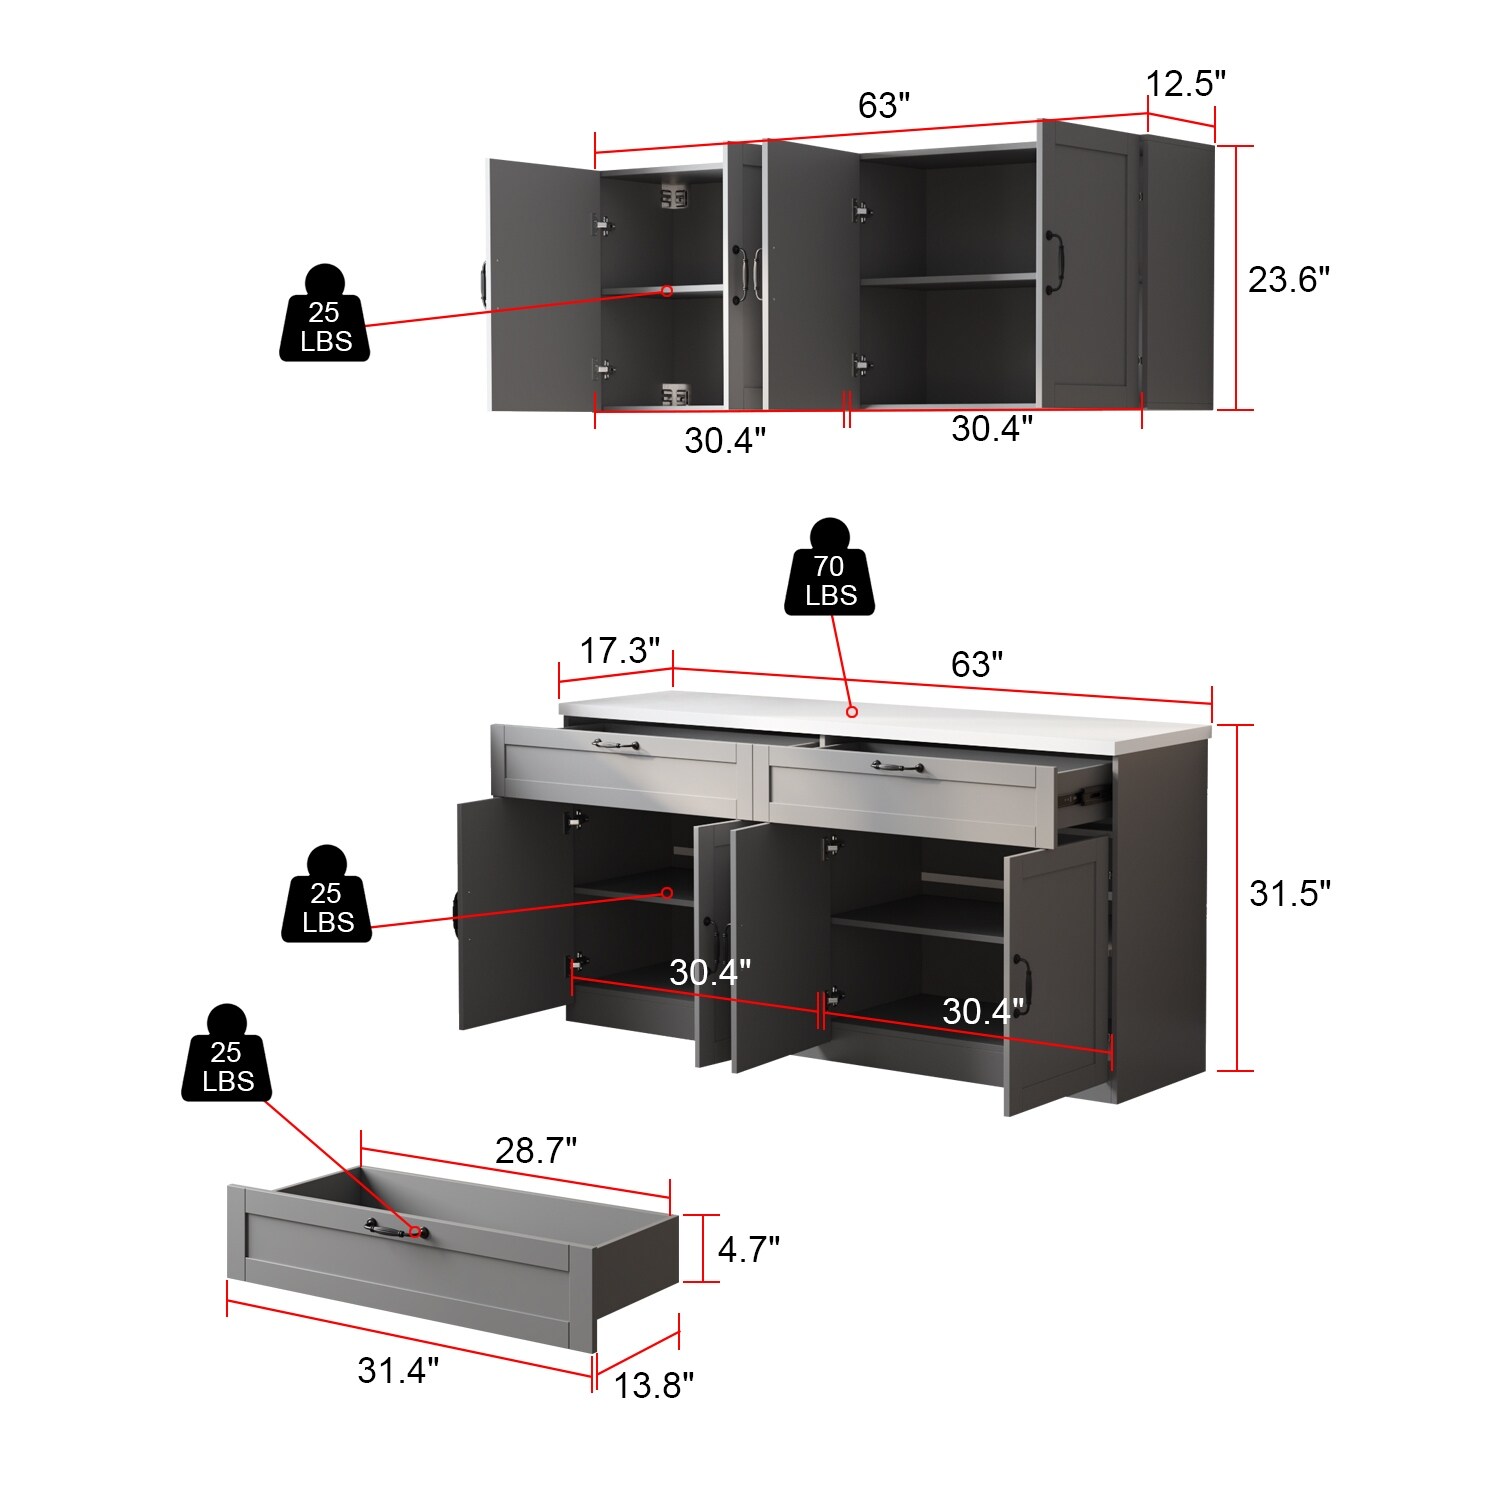 https://ak1.ostkcdn.com/images/products/is/images/direct/12e07ec1813360be5682c47063271e6f884c336b/Storage-Cabinet-Kitchen-Pantry-Garage-Wall-Floor-and-Wall-Cabinet-Set.jpg